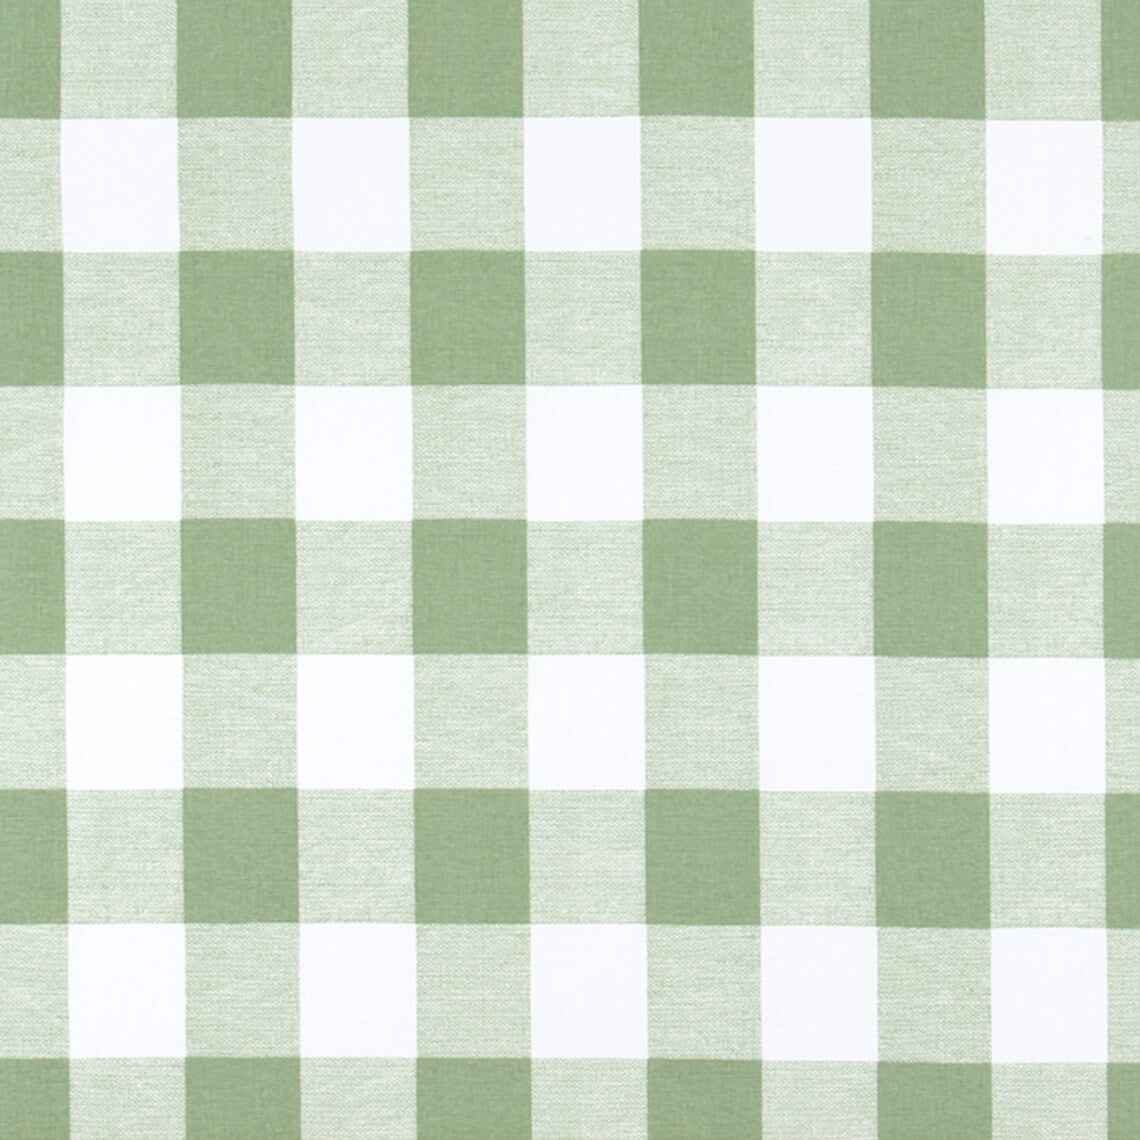 Pinch Pleated Curtains in Anderson Sage Green Buffalo Check Plaid